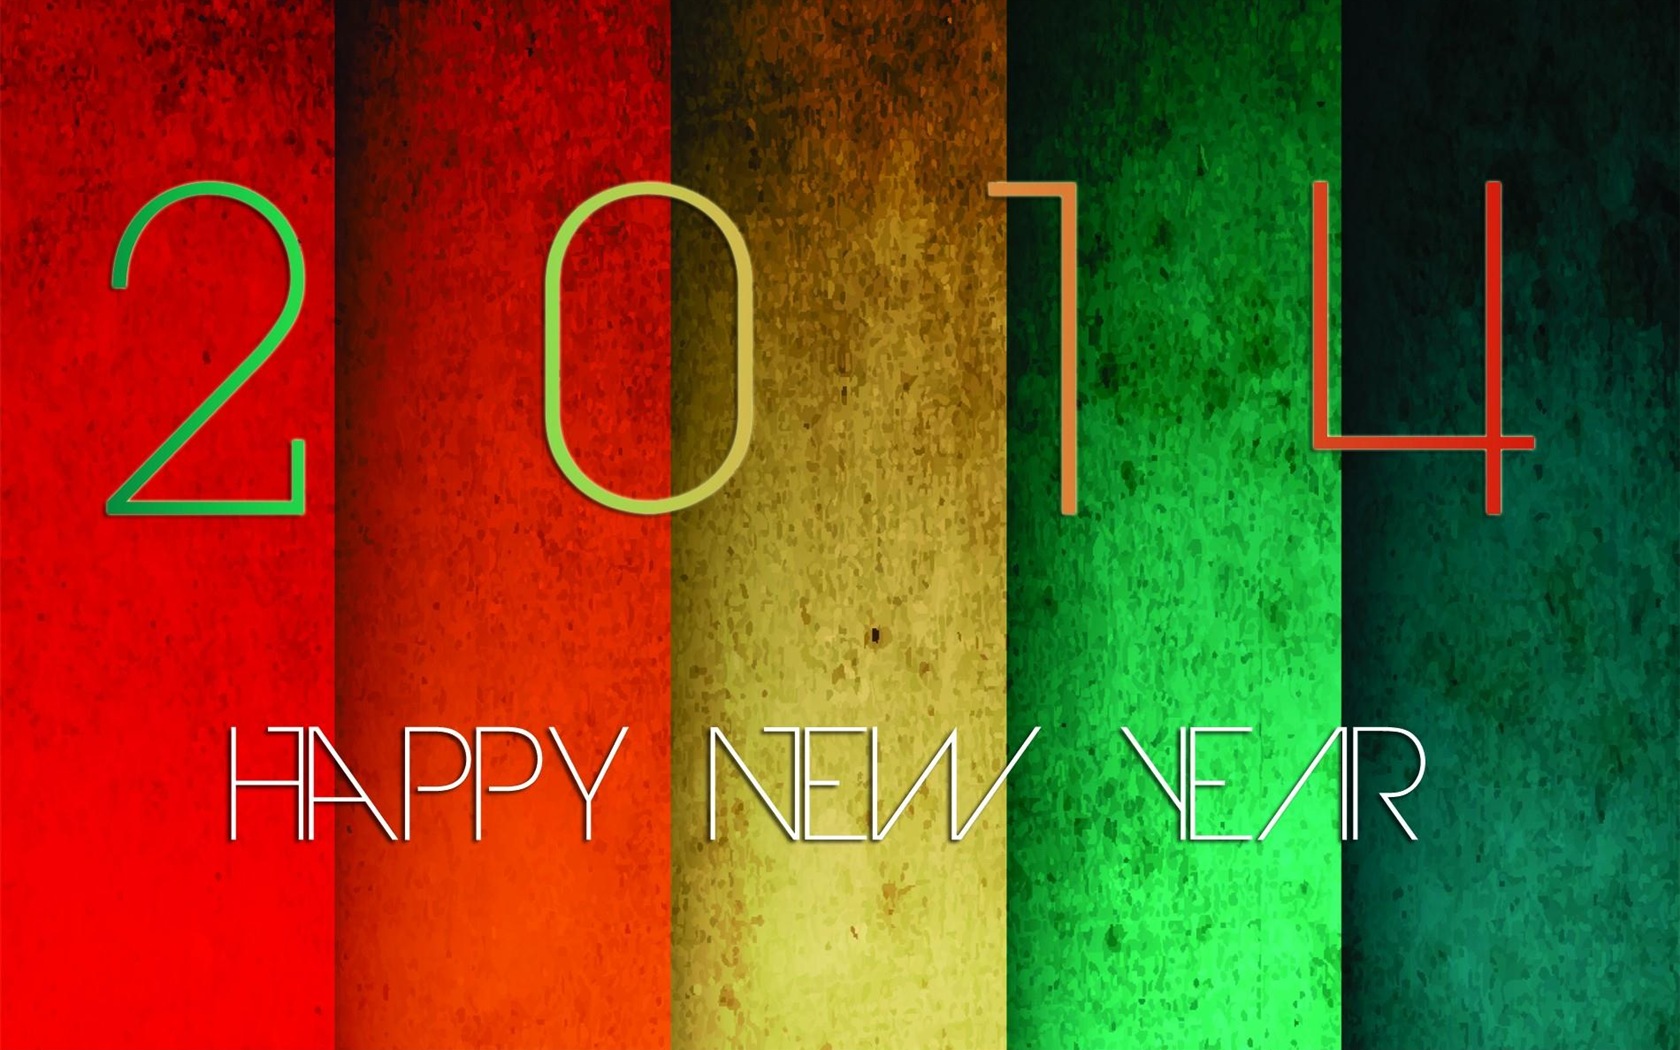 2014 New Year Theme HD Wallpapers (2) #3 - 1680x1050